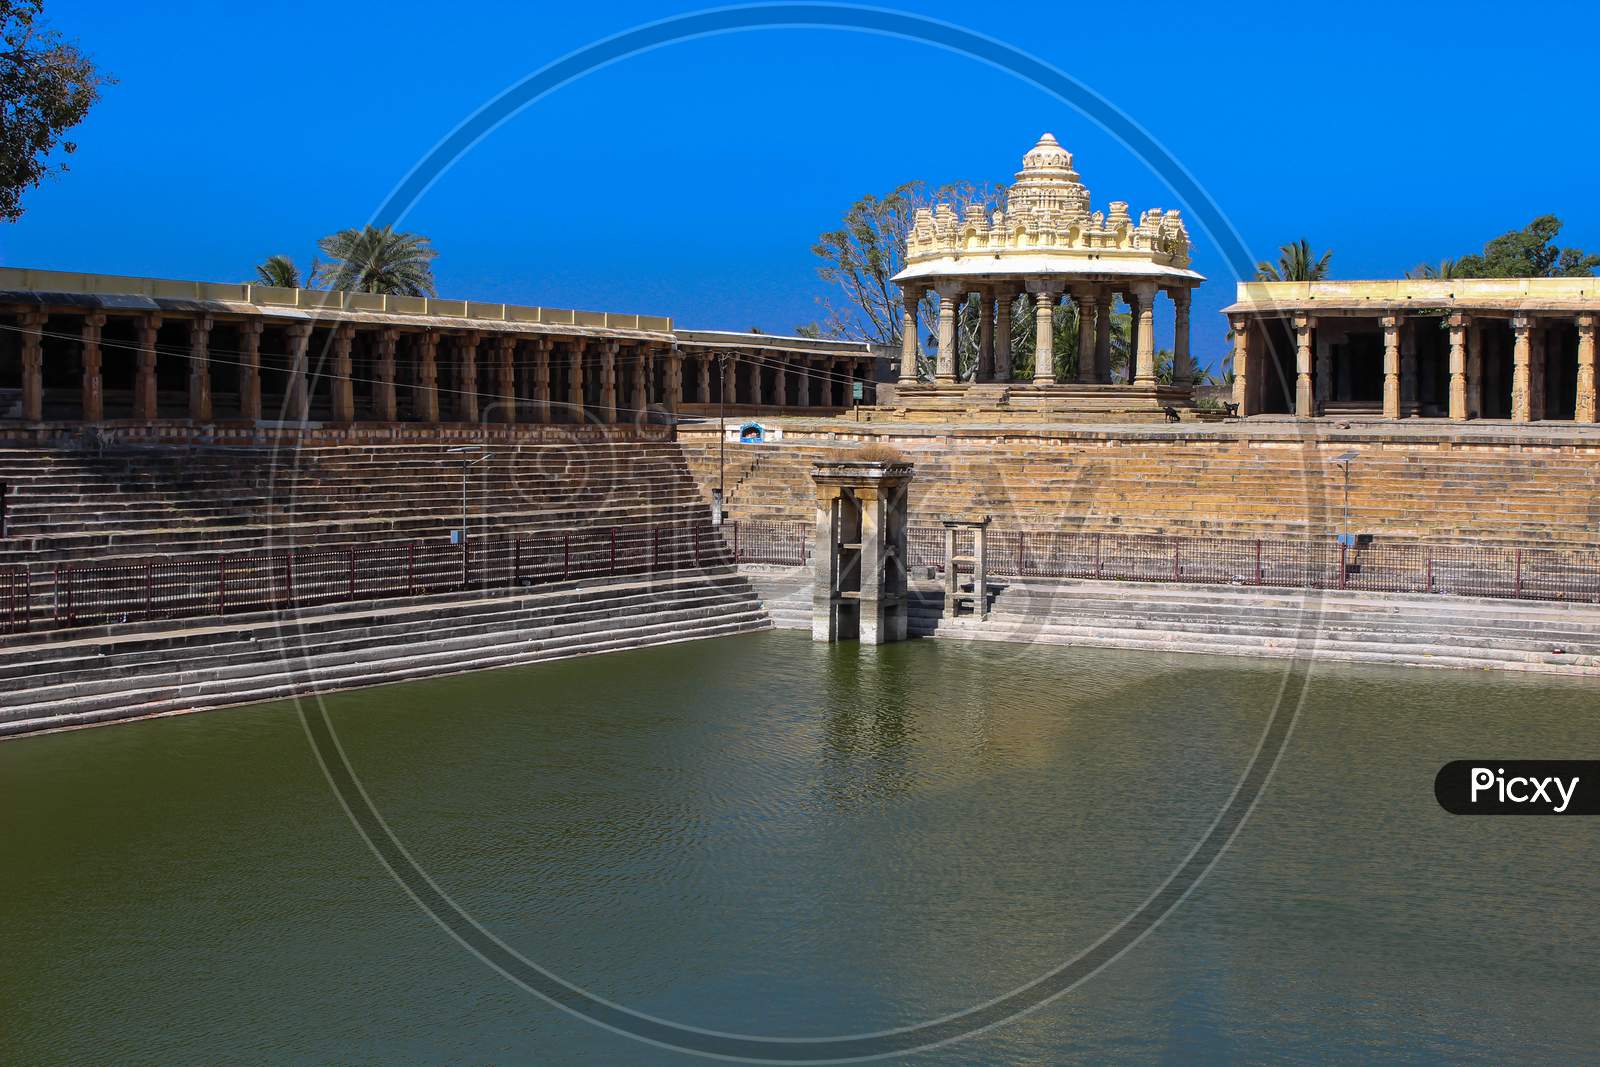 A Divine view of a Ancient Water Pond Known as Kalyani built in 1550s C.E. at Melukote religious town near Mysuru in Karnataka/India.